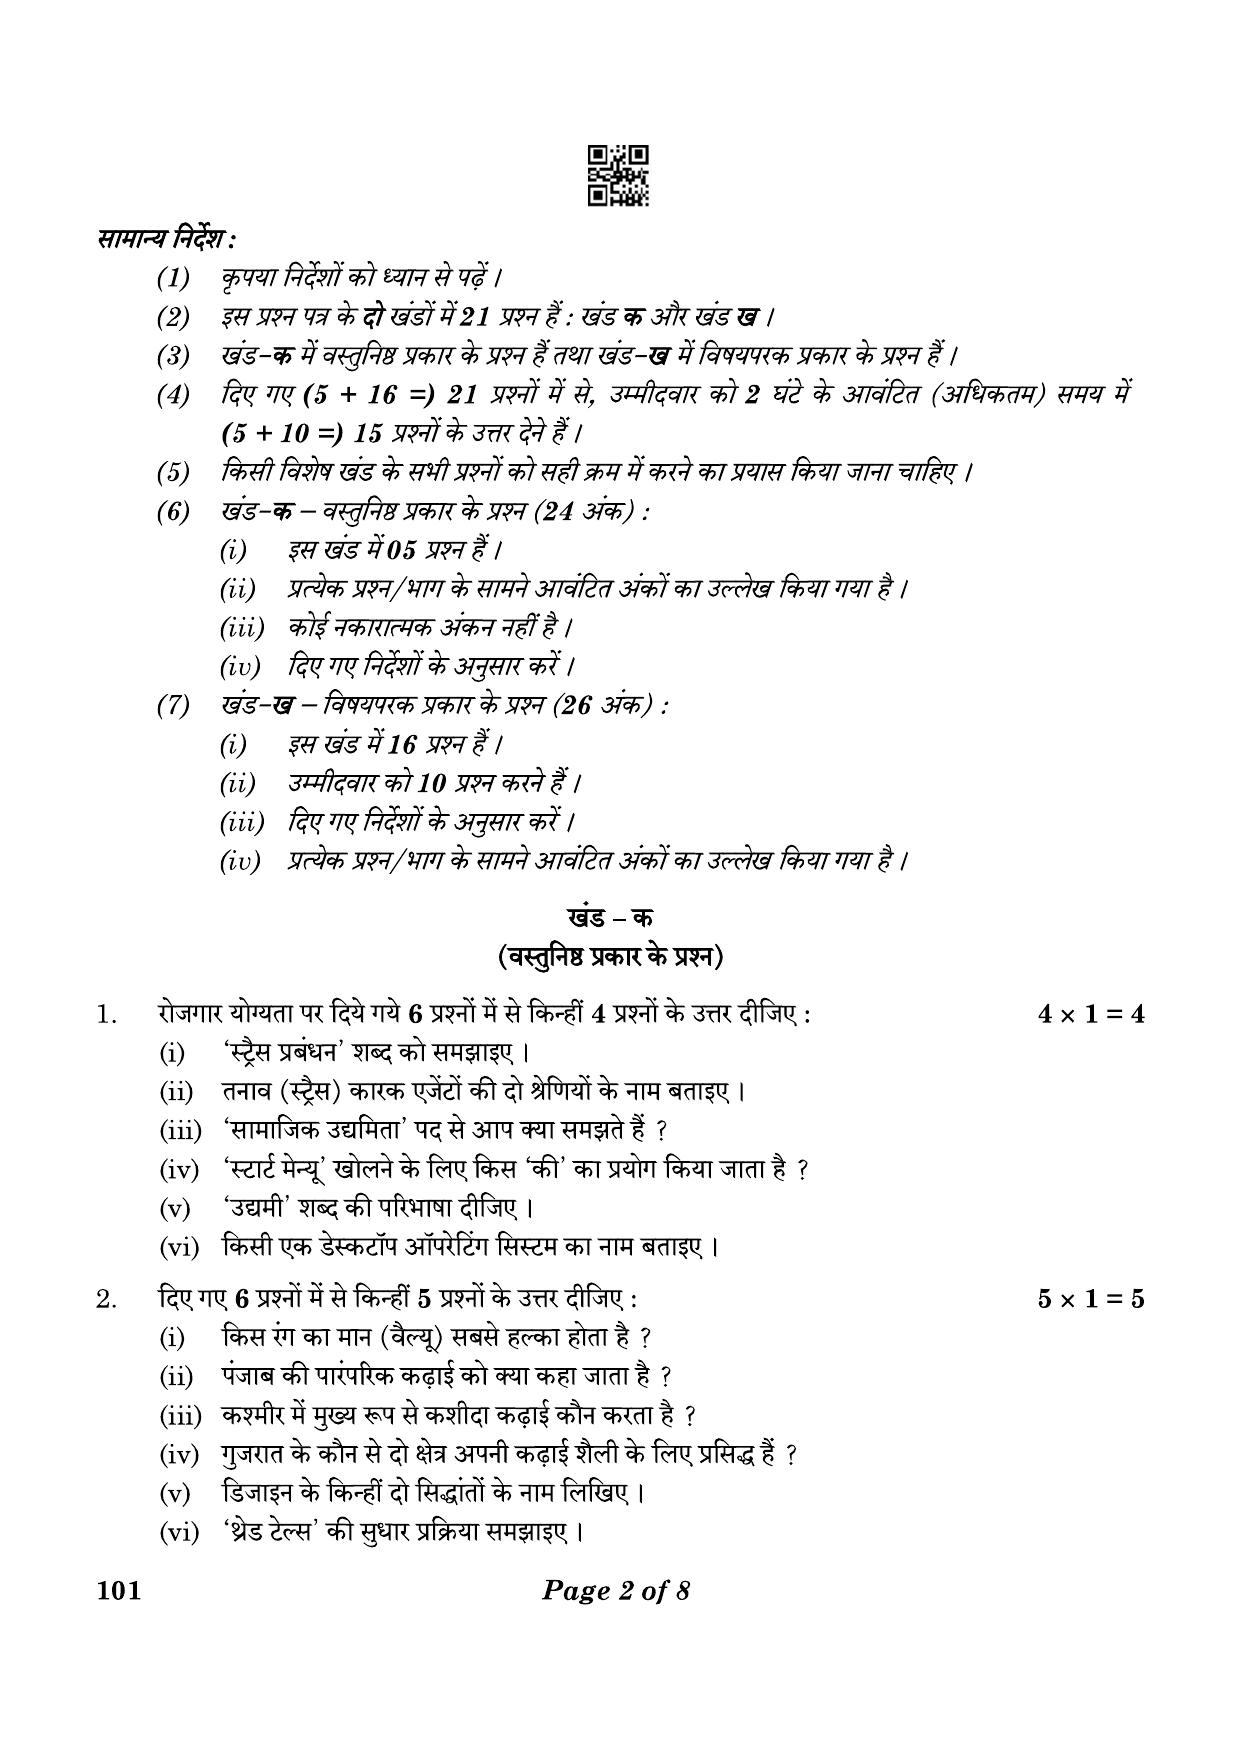 CBSE Class 10 101 Apparel 2023 Question Paper - Page 2